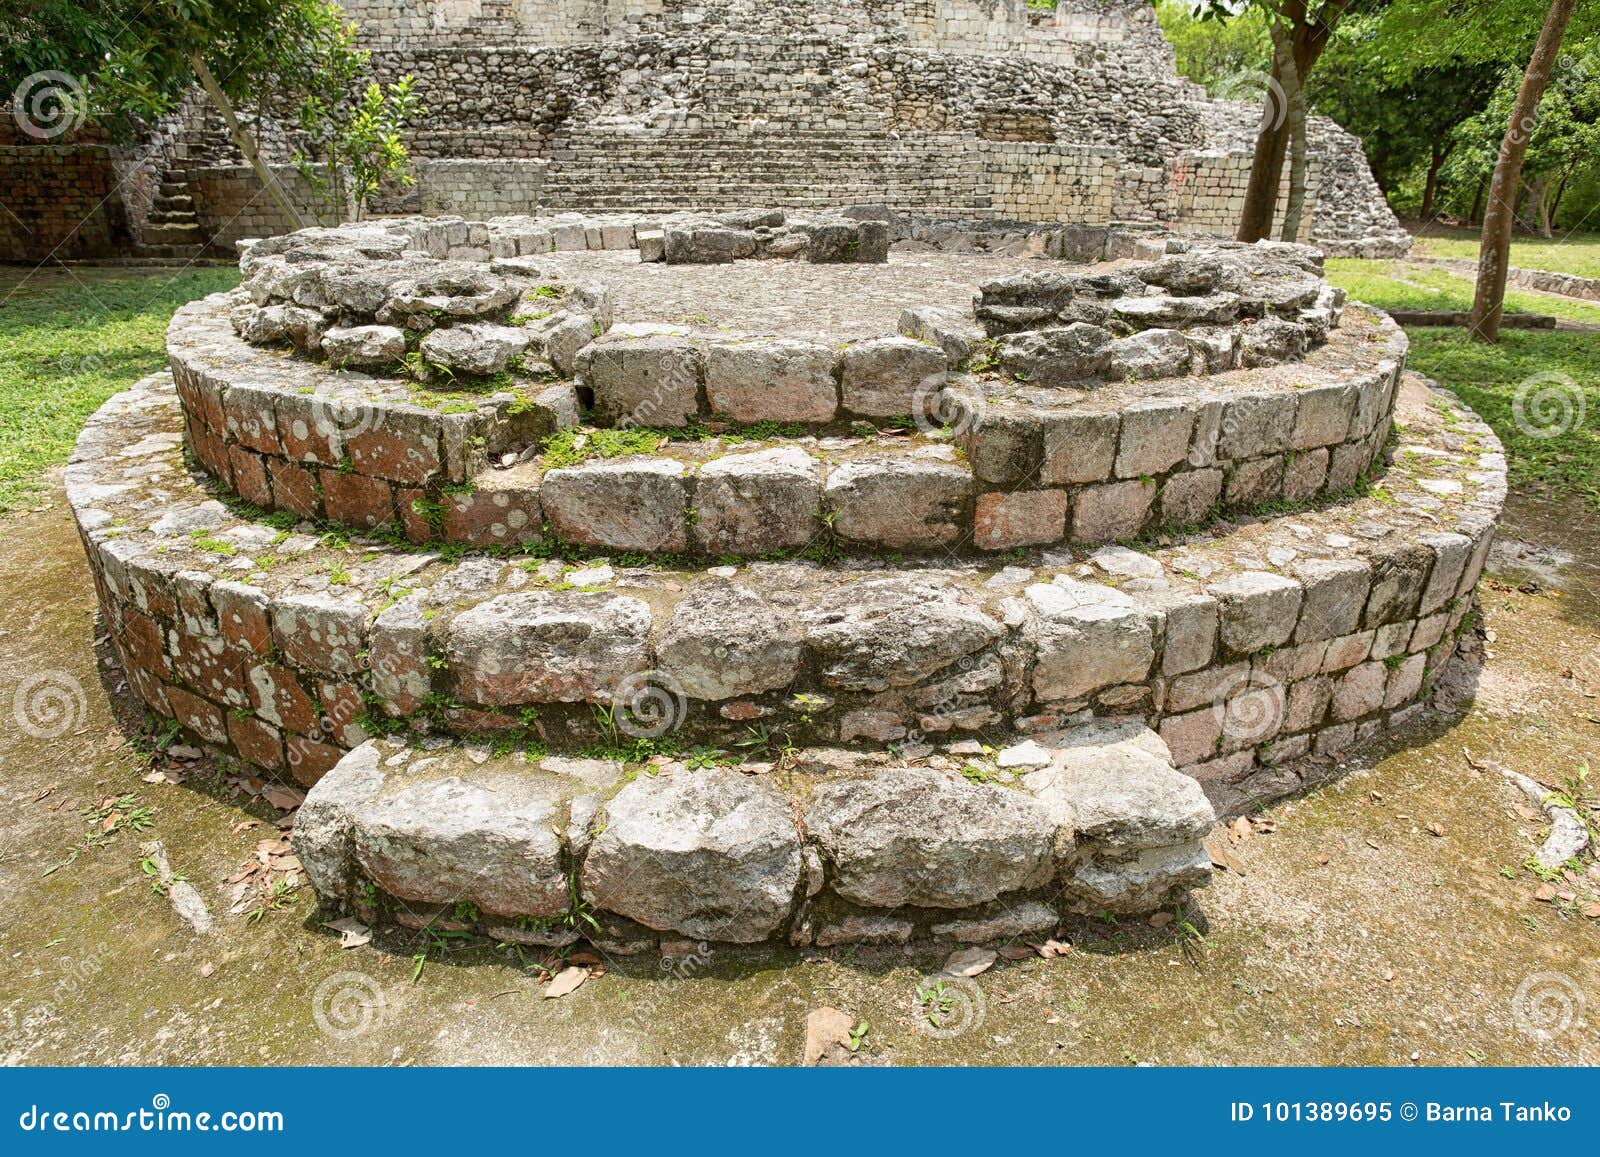 becan archaeological park in yucatan mexico